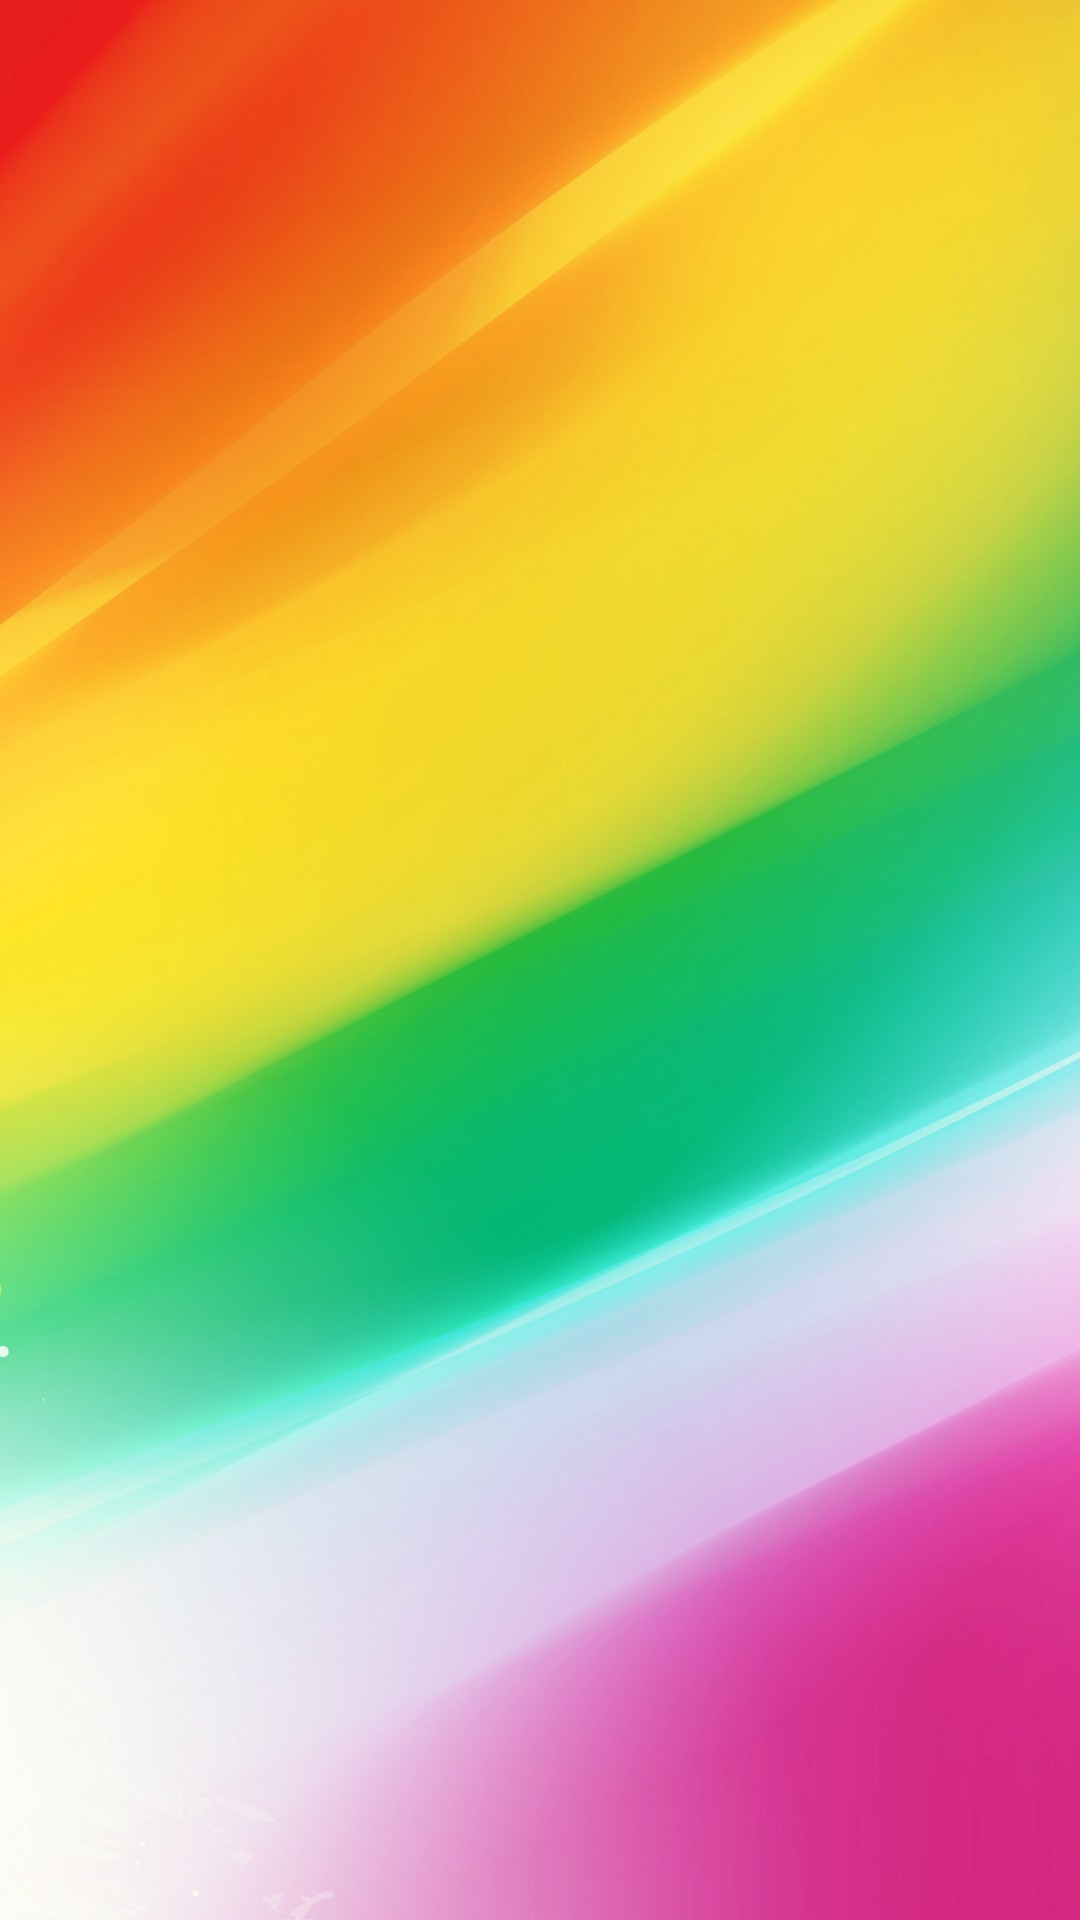 Light Colorful iPhone 8 Wallpaper With high-resolution 1080X1920 pixel. You can use this wallpaper for your iPhone 5, 6, 7, 8, X, XS, XR backgrounds, Mobile Screensaver, or iPad Lock Screen